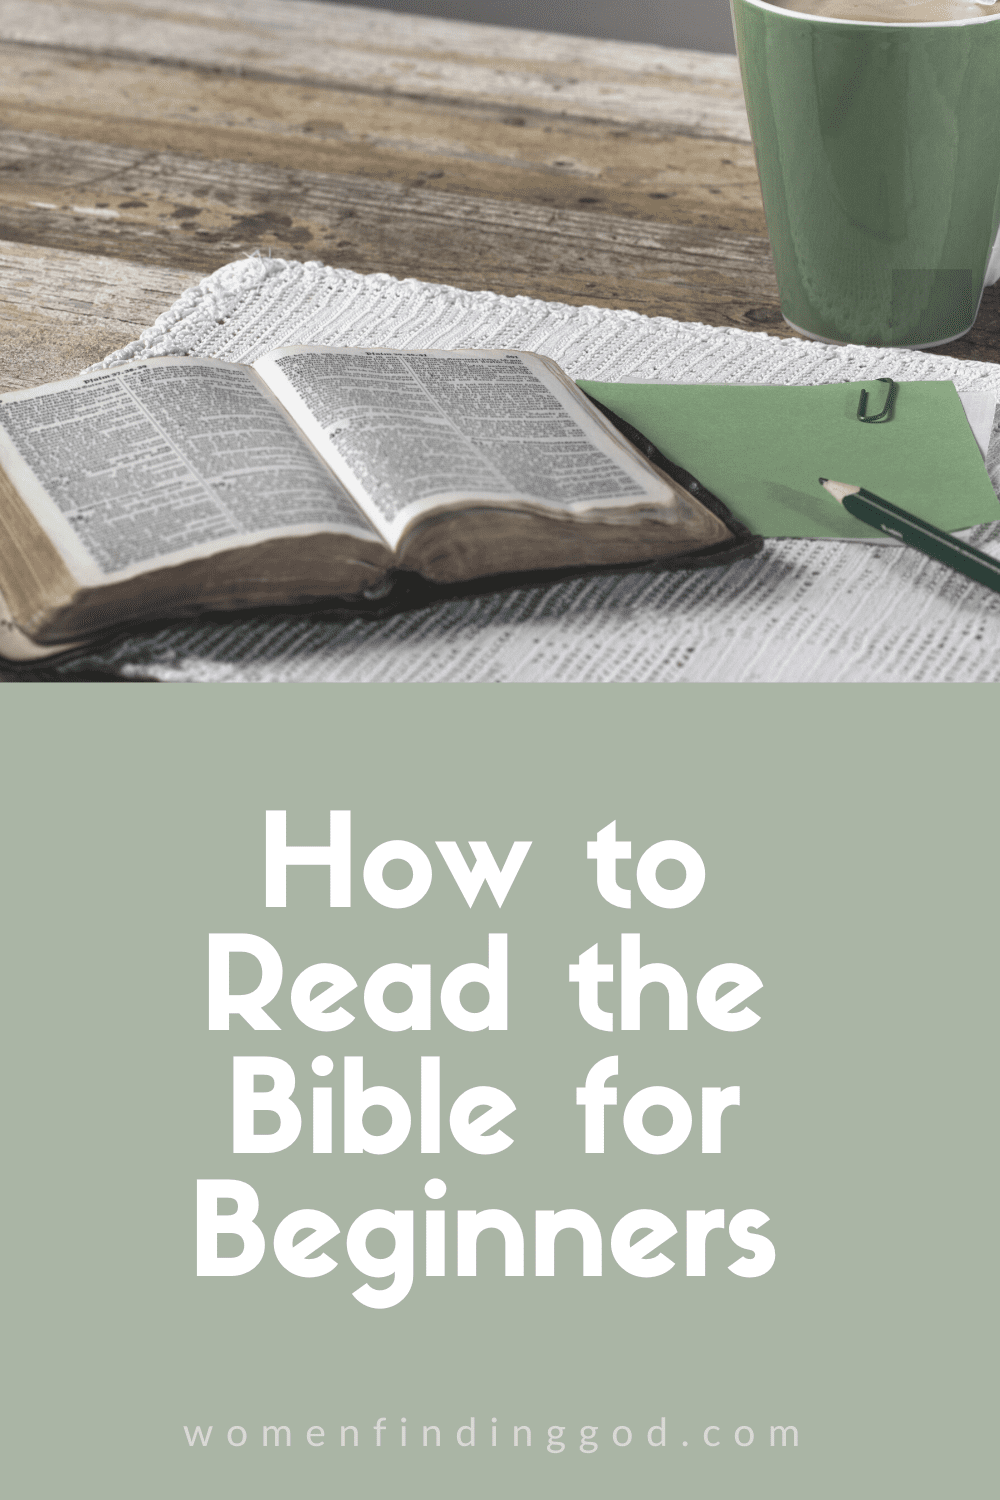 Are you ready to learn how to read the bible? Reading the Bible is one of the best ways to get closer to God! Here are some ideas on how to include this spiritual discipline in your daily quiet time with God. Plus, tips about creating your own bible reading plan and reading through the entire bible! via @womenfindinggod